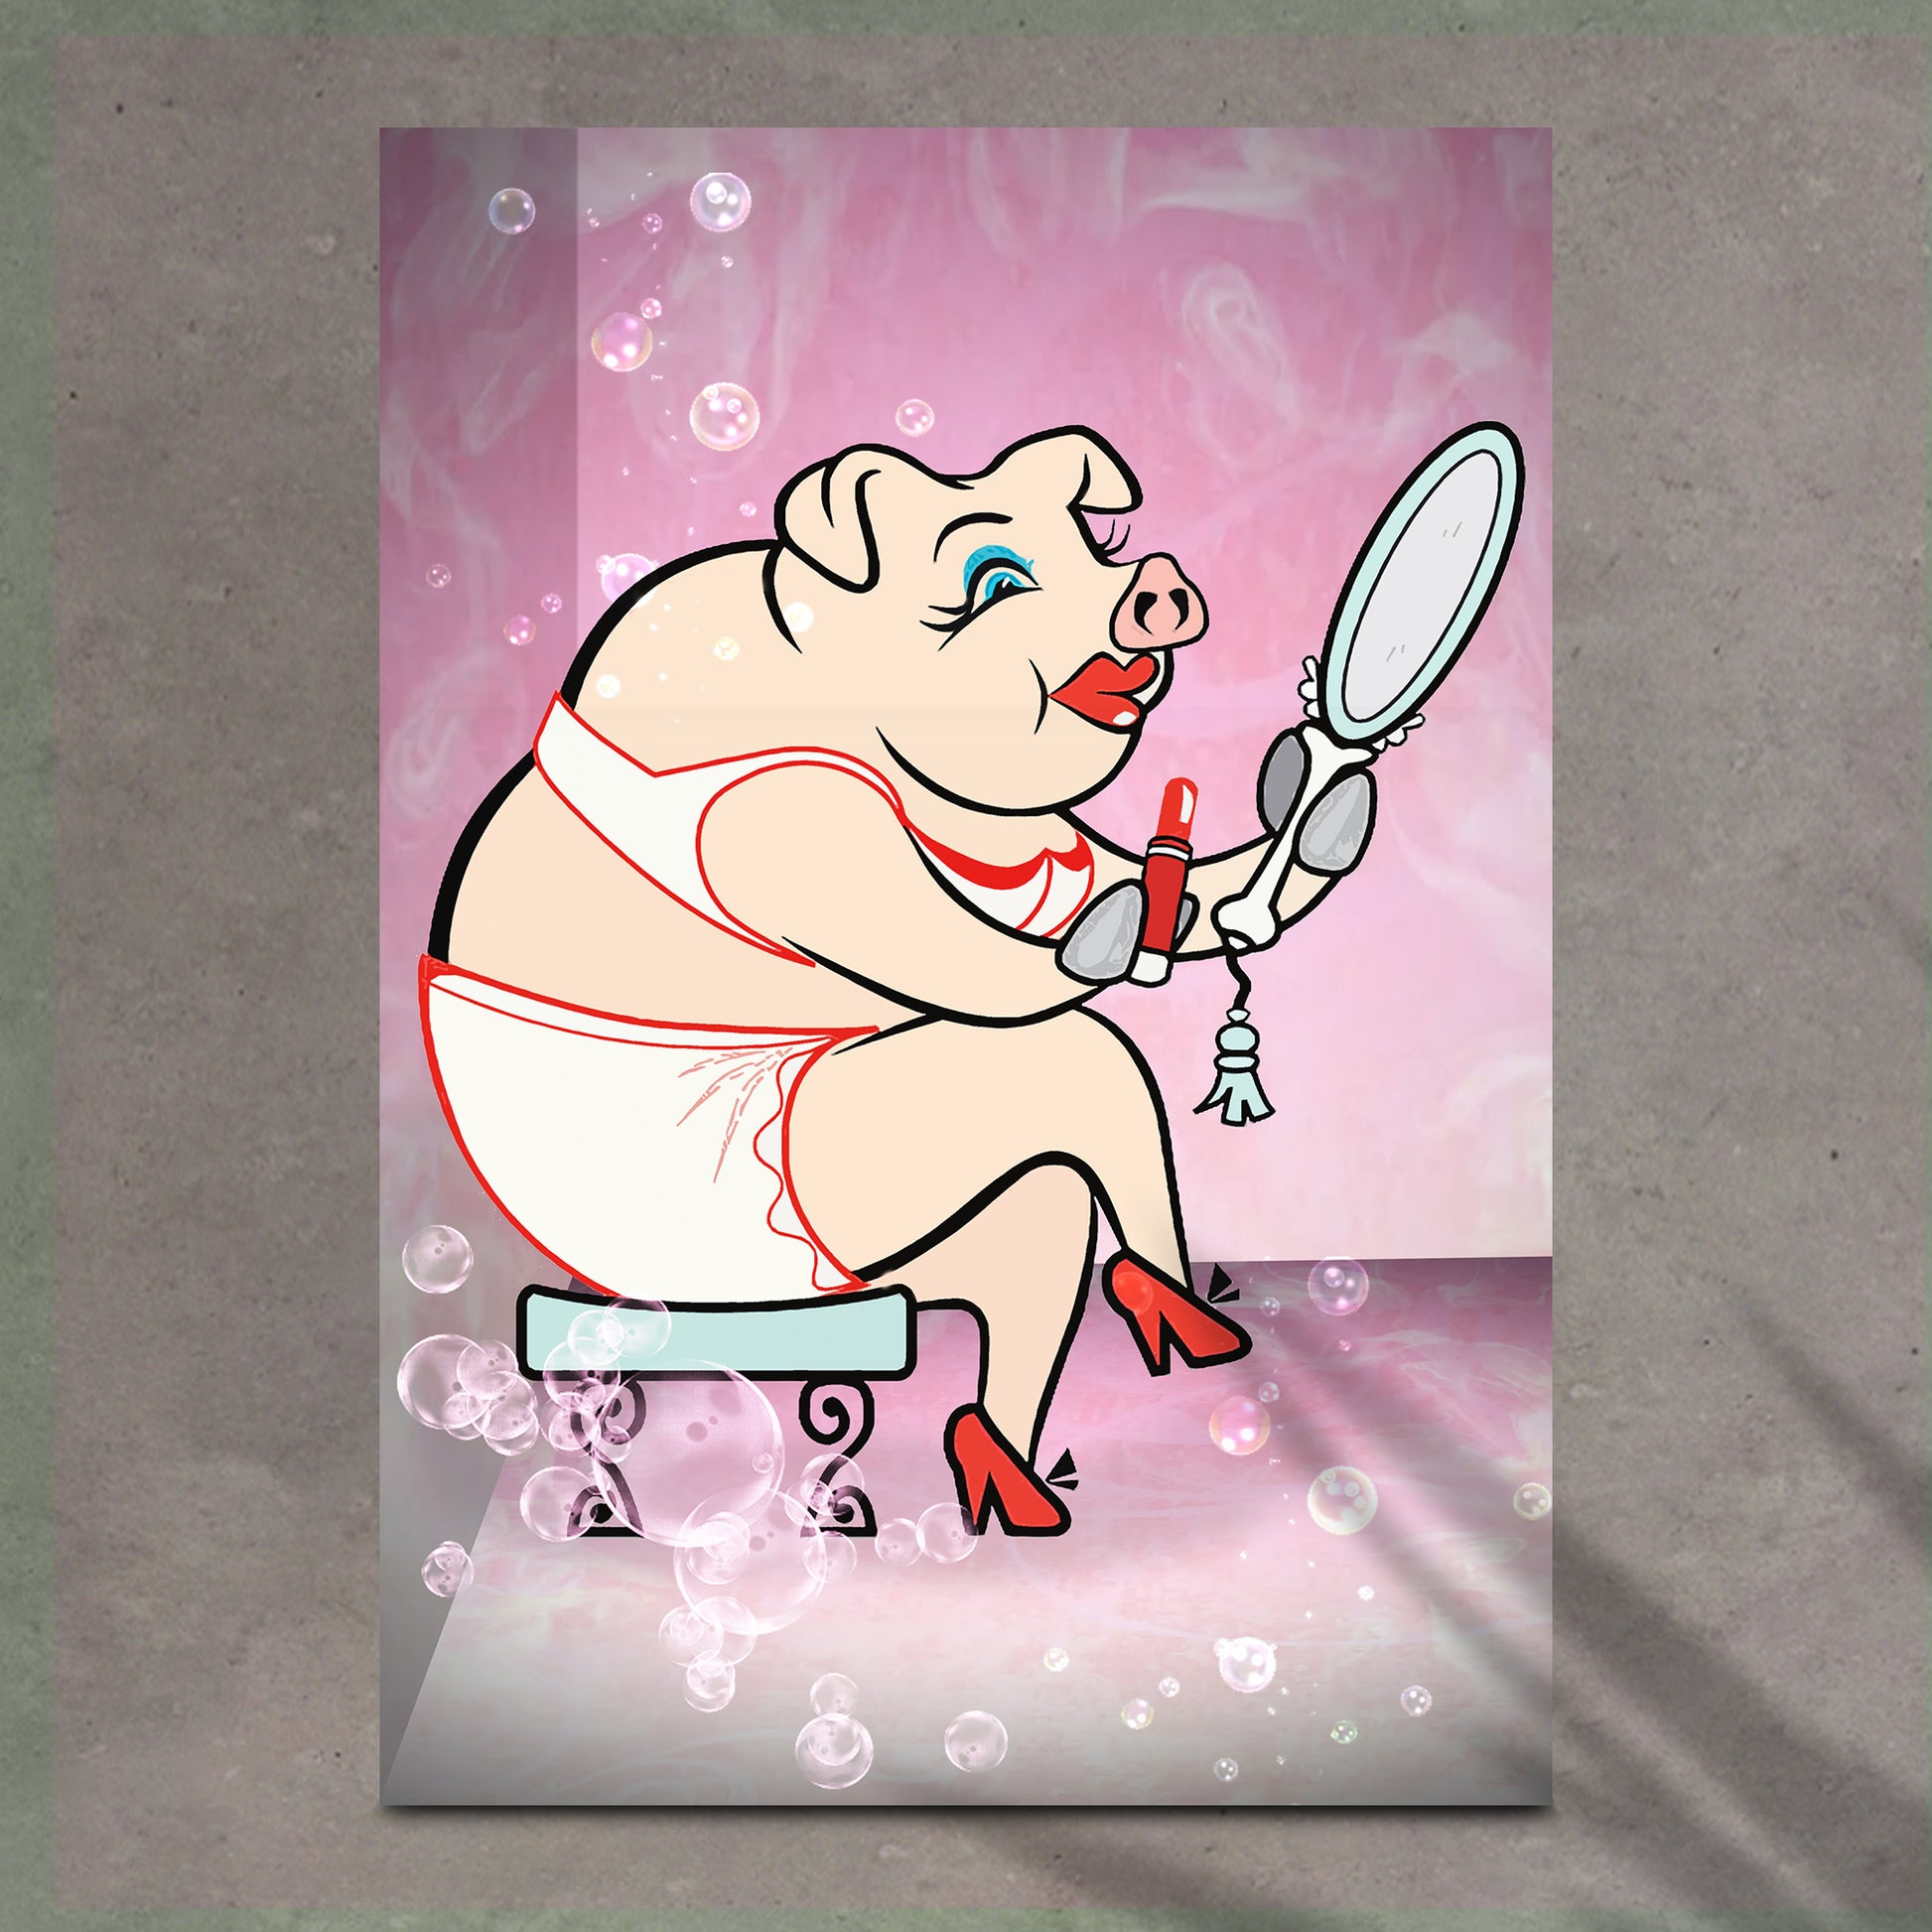 Sassy Pig Portrait Canvas Wall Art - Image by Tailored Canvases